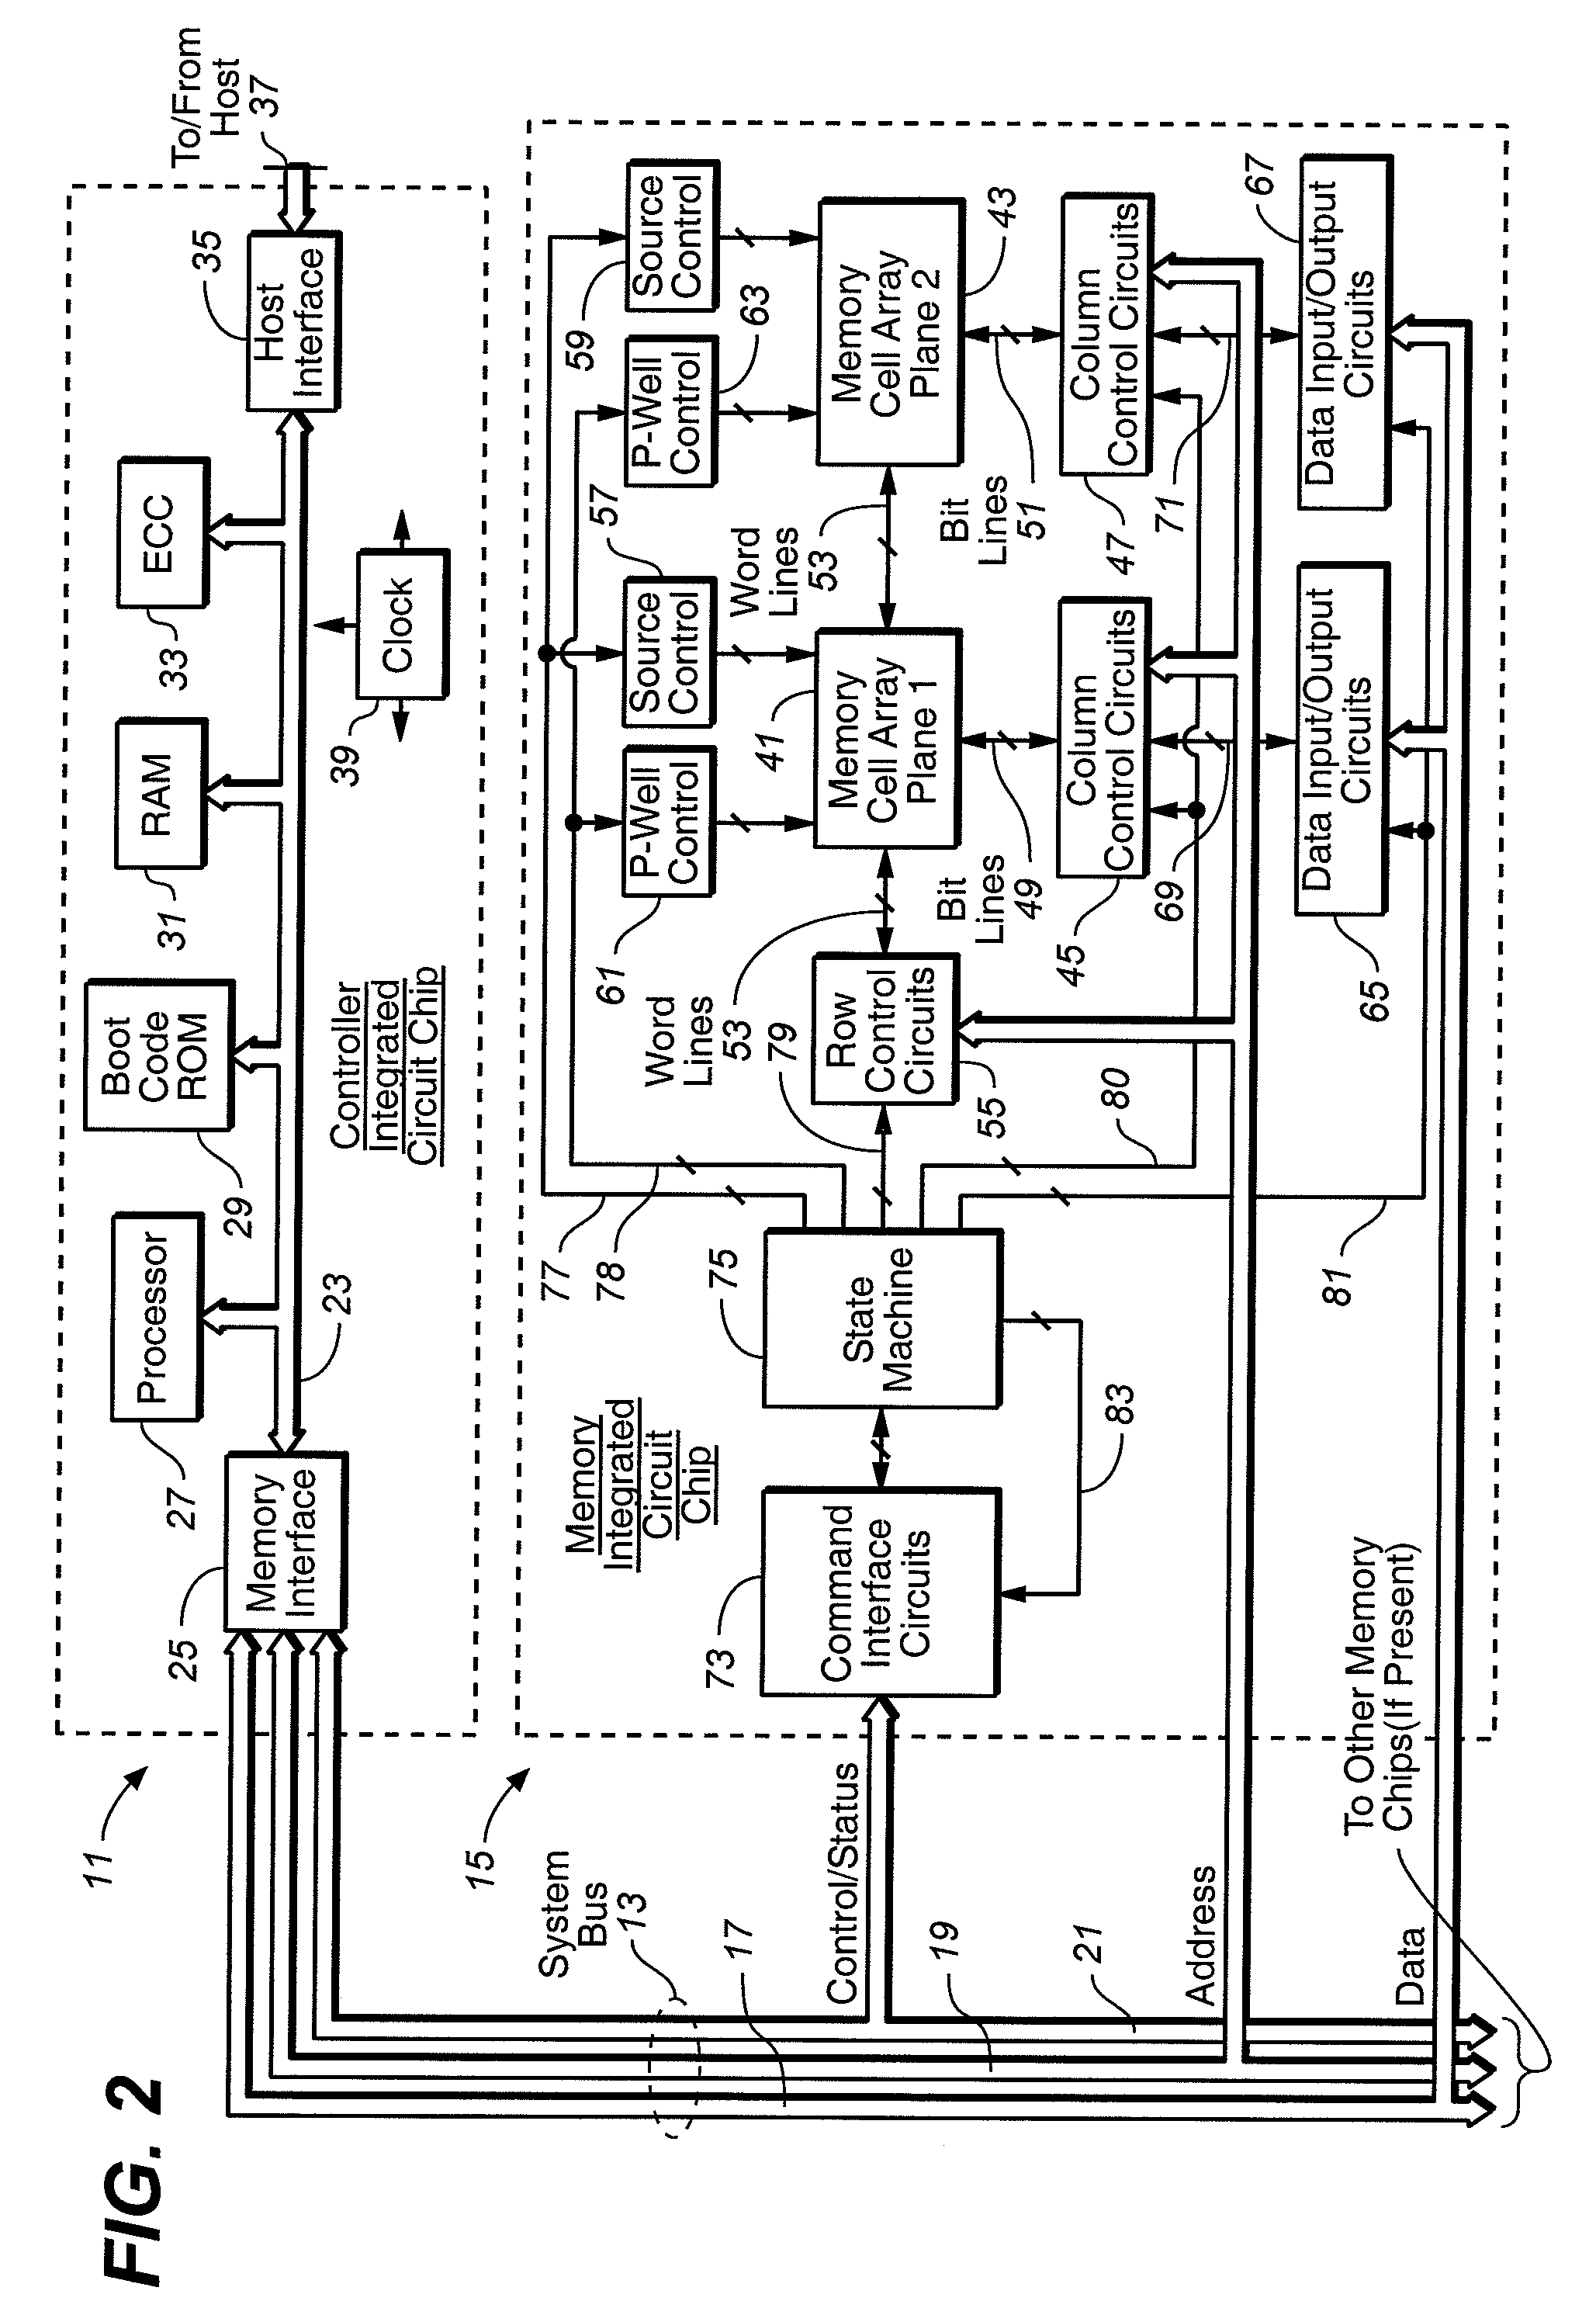 Reprogrammable Non-Volatile Memory Systems With Indexing of Directly Stored Data Files